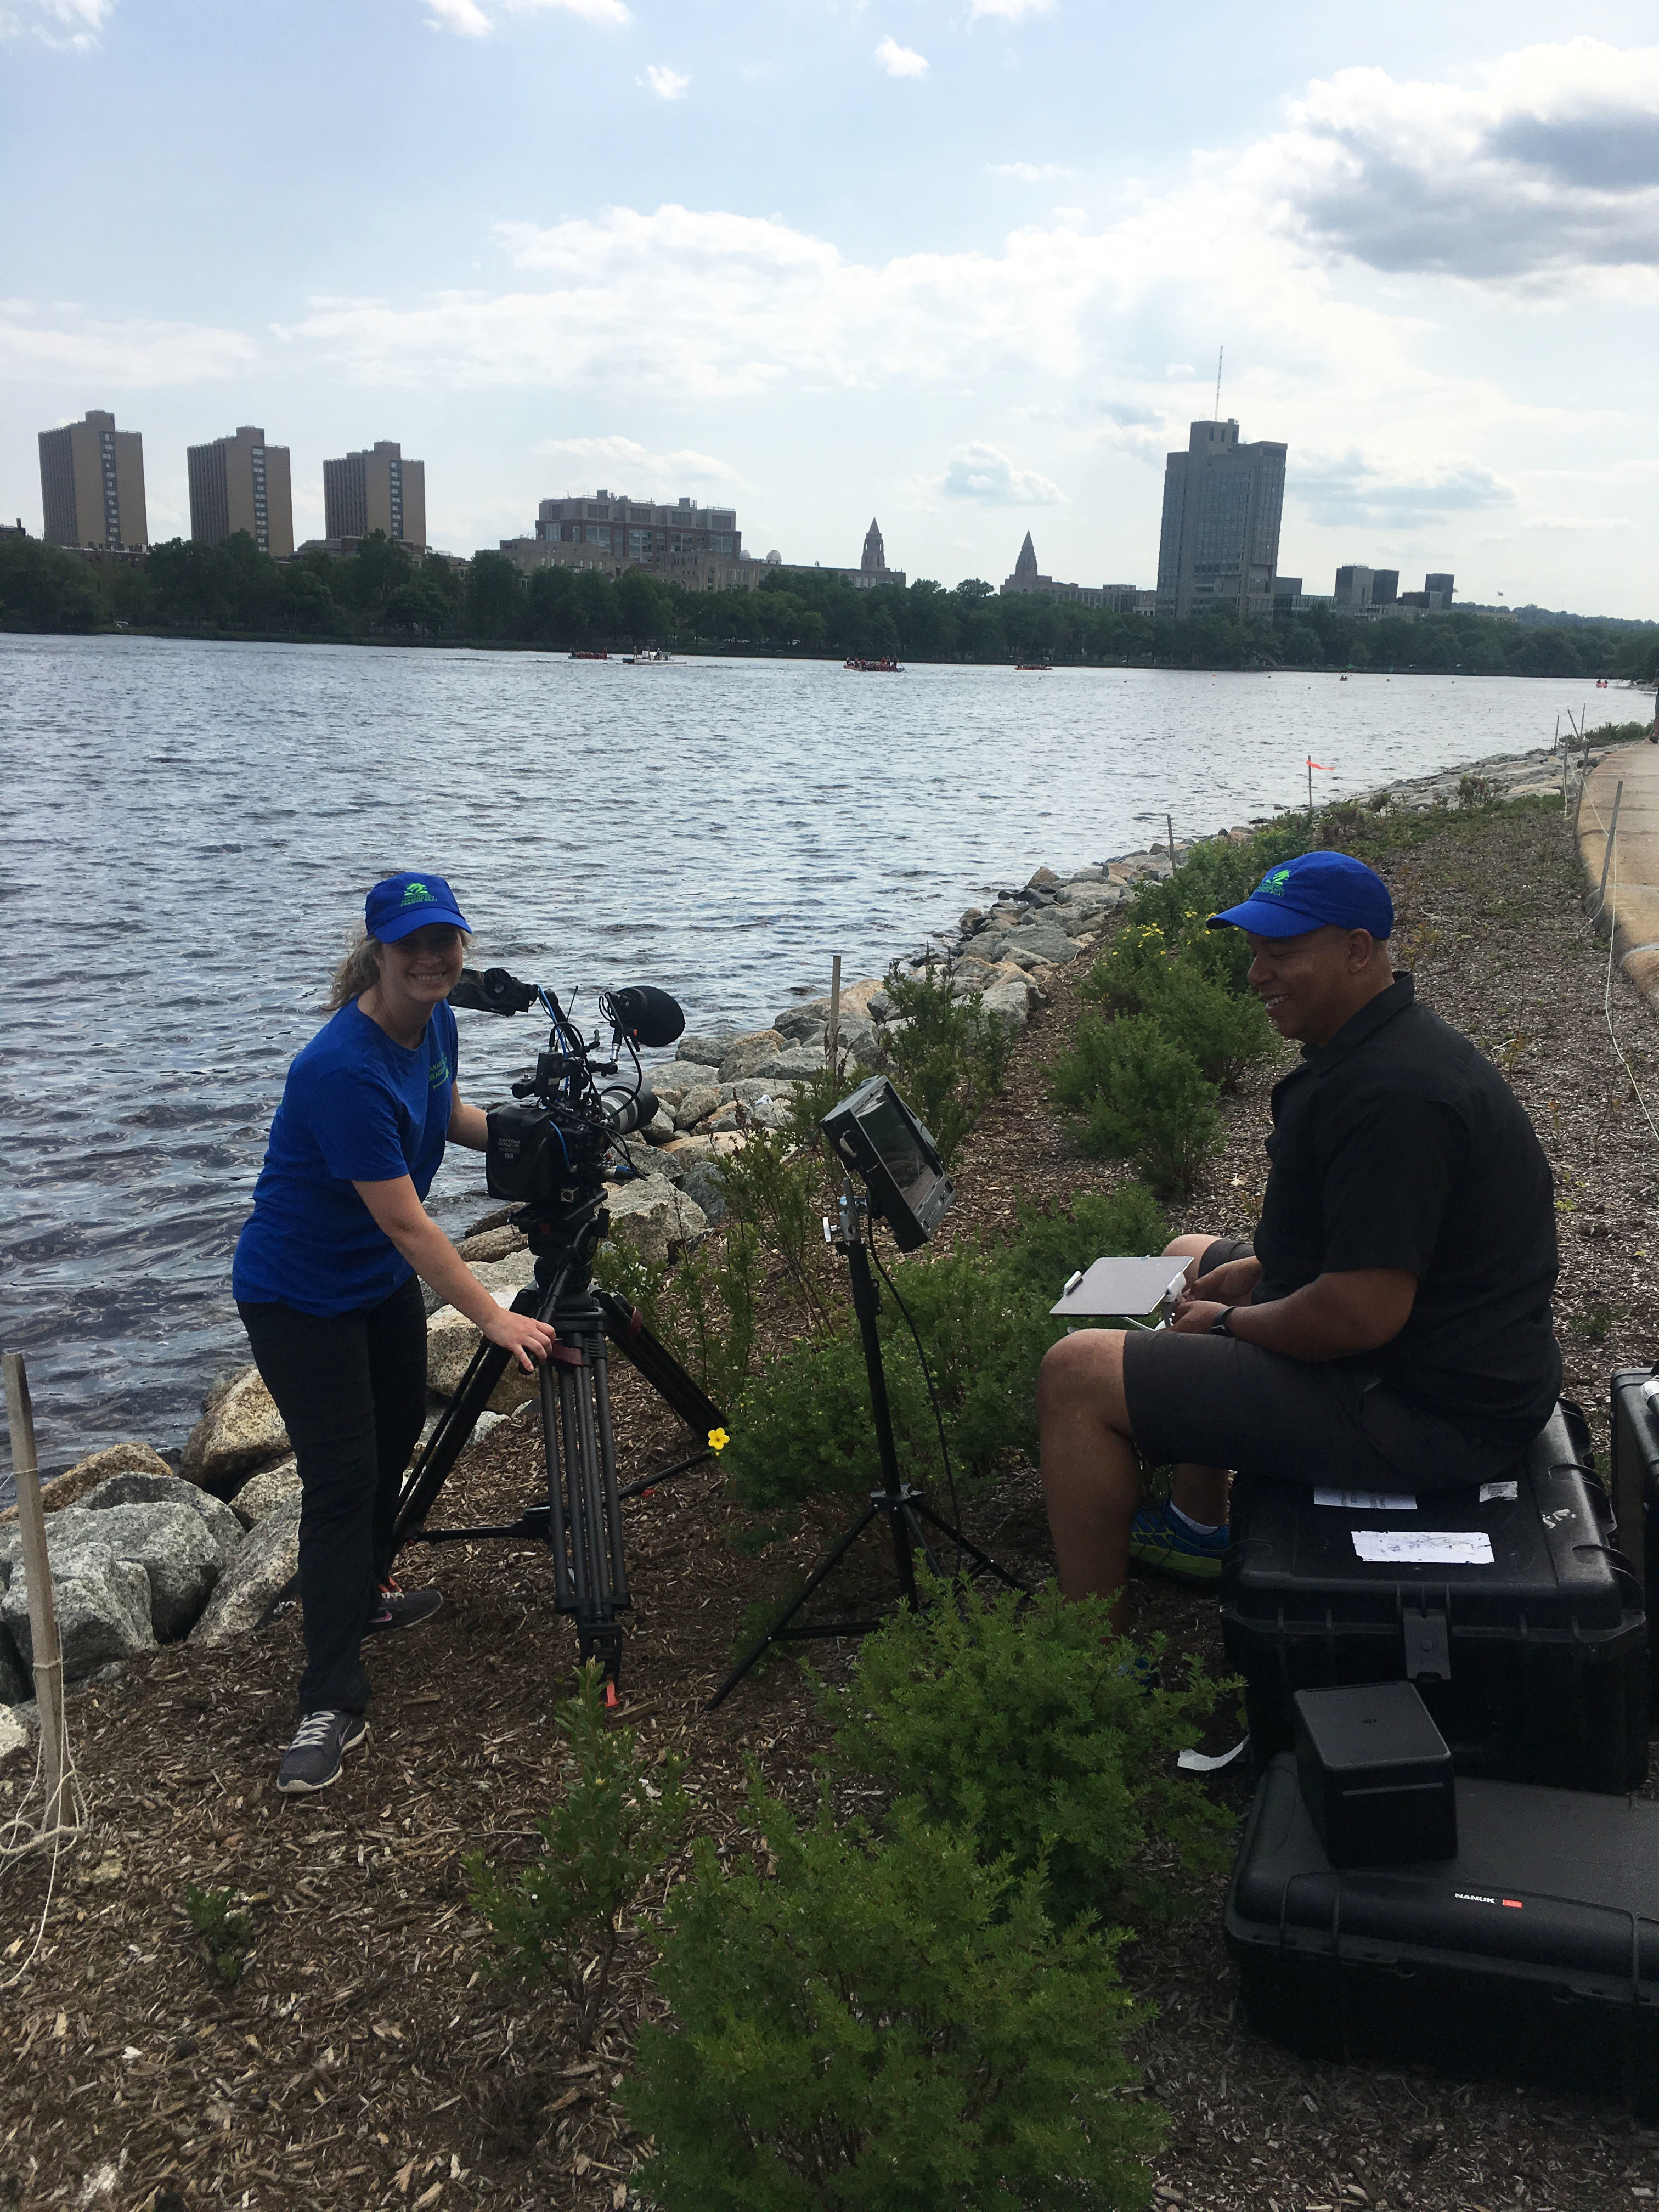 Filmmaker Katie Prentiss Onsager and Cinematographer Corey Lillard set up equipment on the bank of the Charles River.